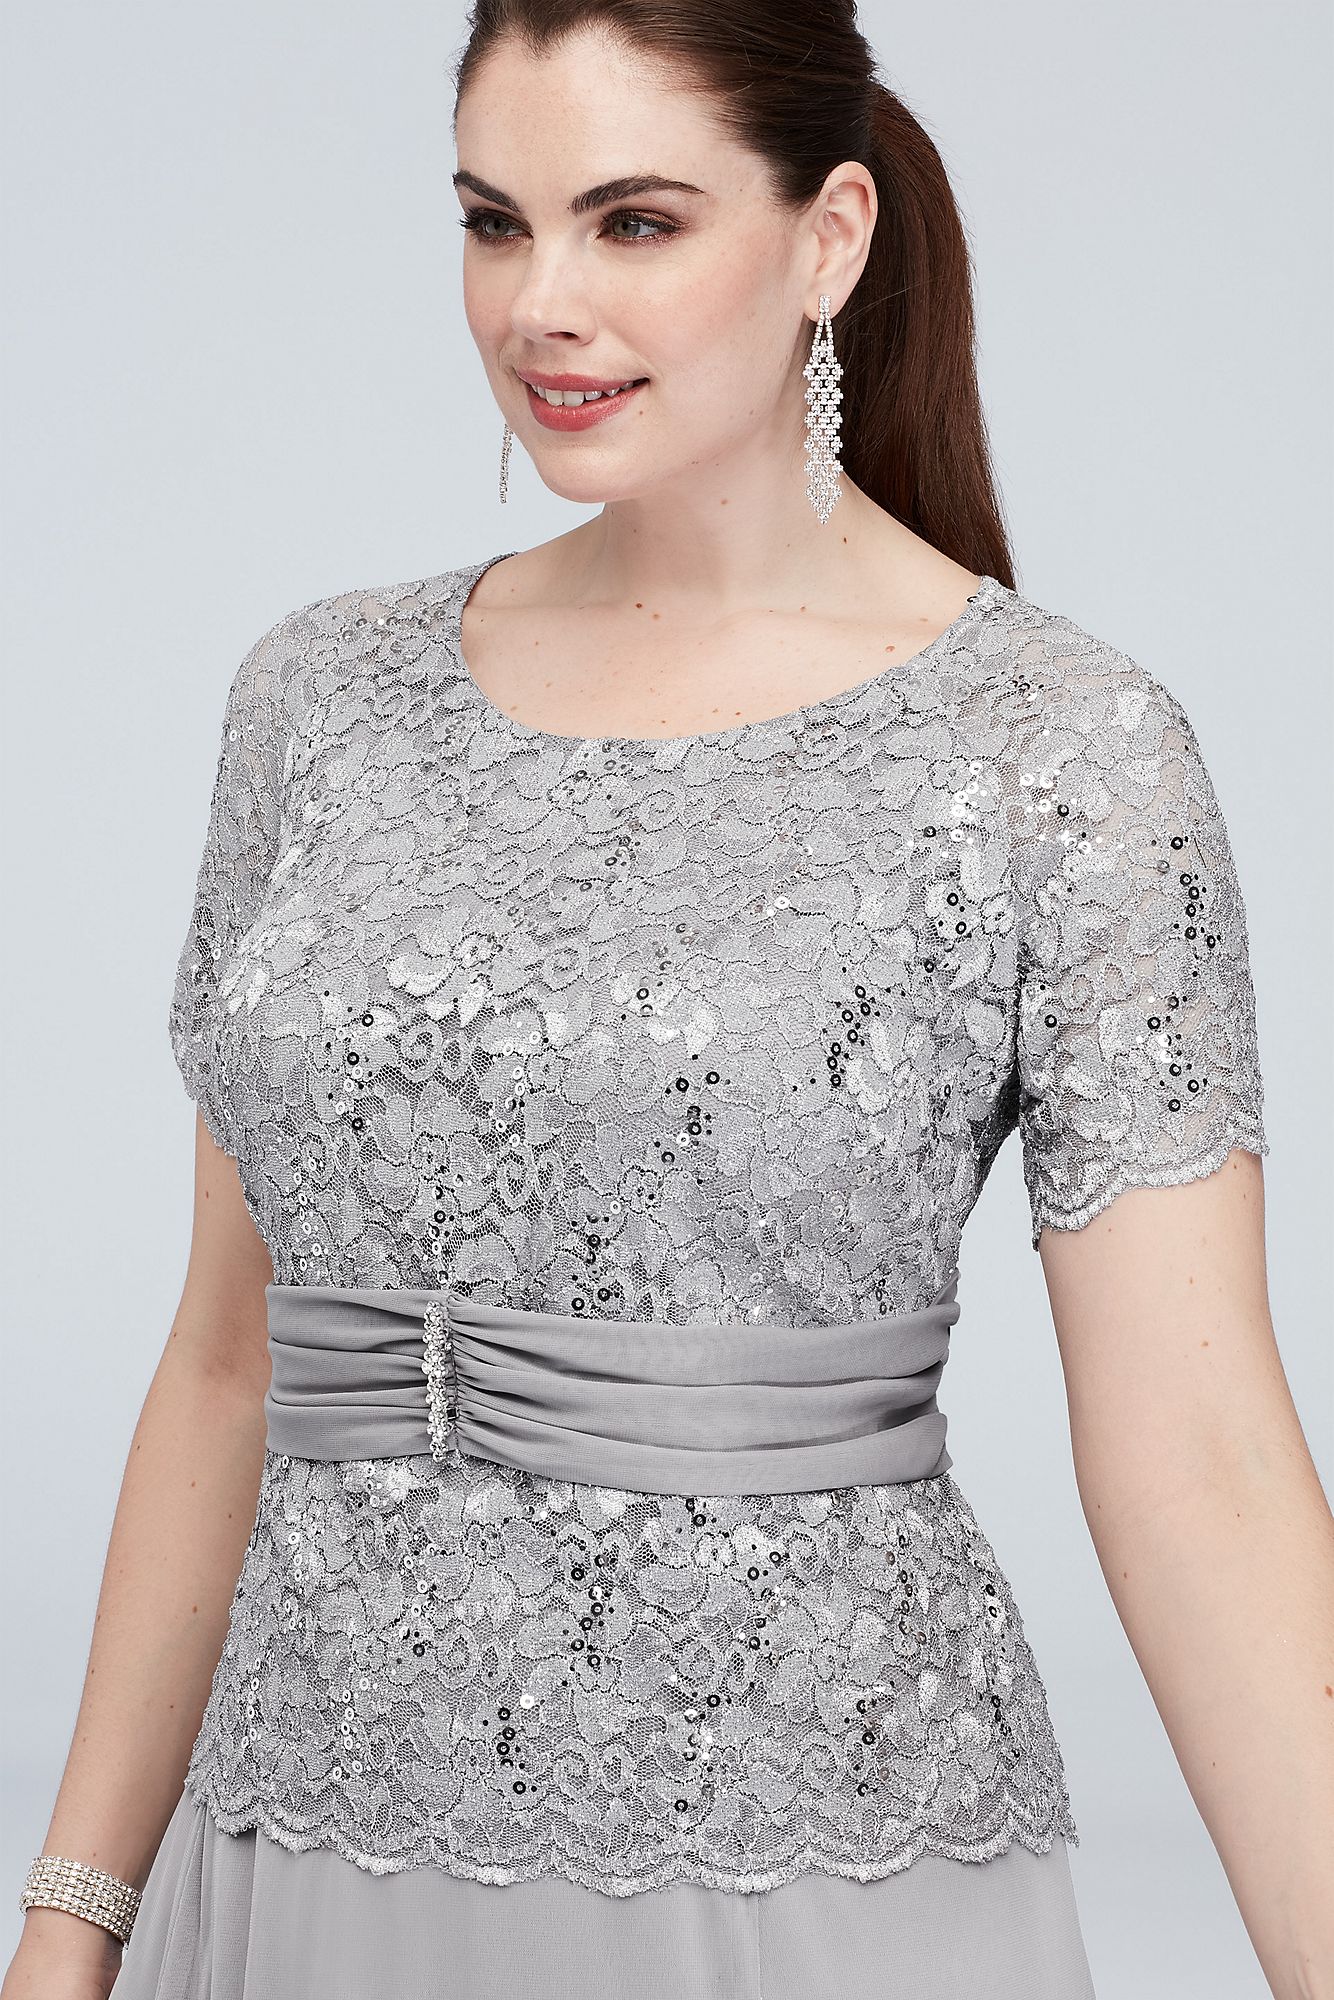 Short Sleeve Long Chiffon and Lace Mother of the Bride Dress 850223